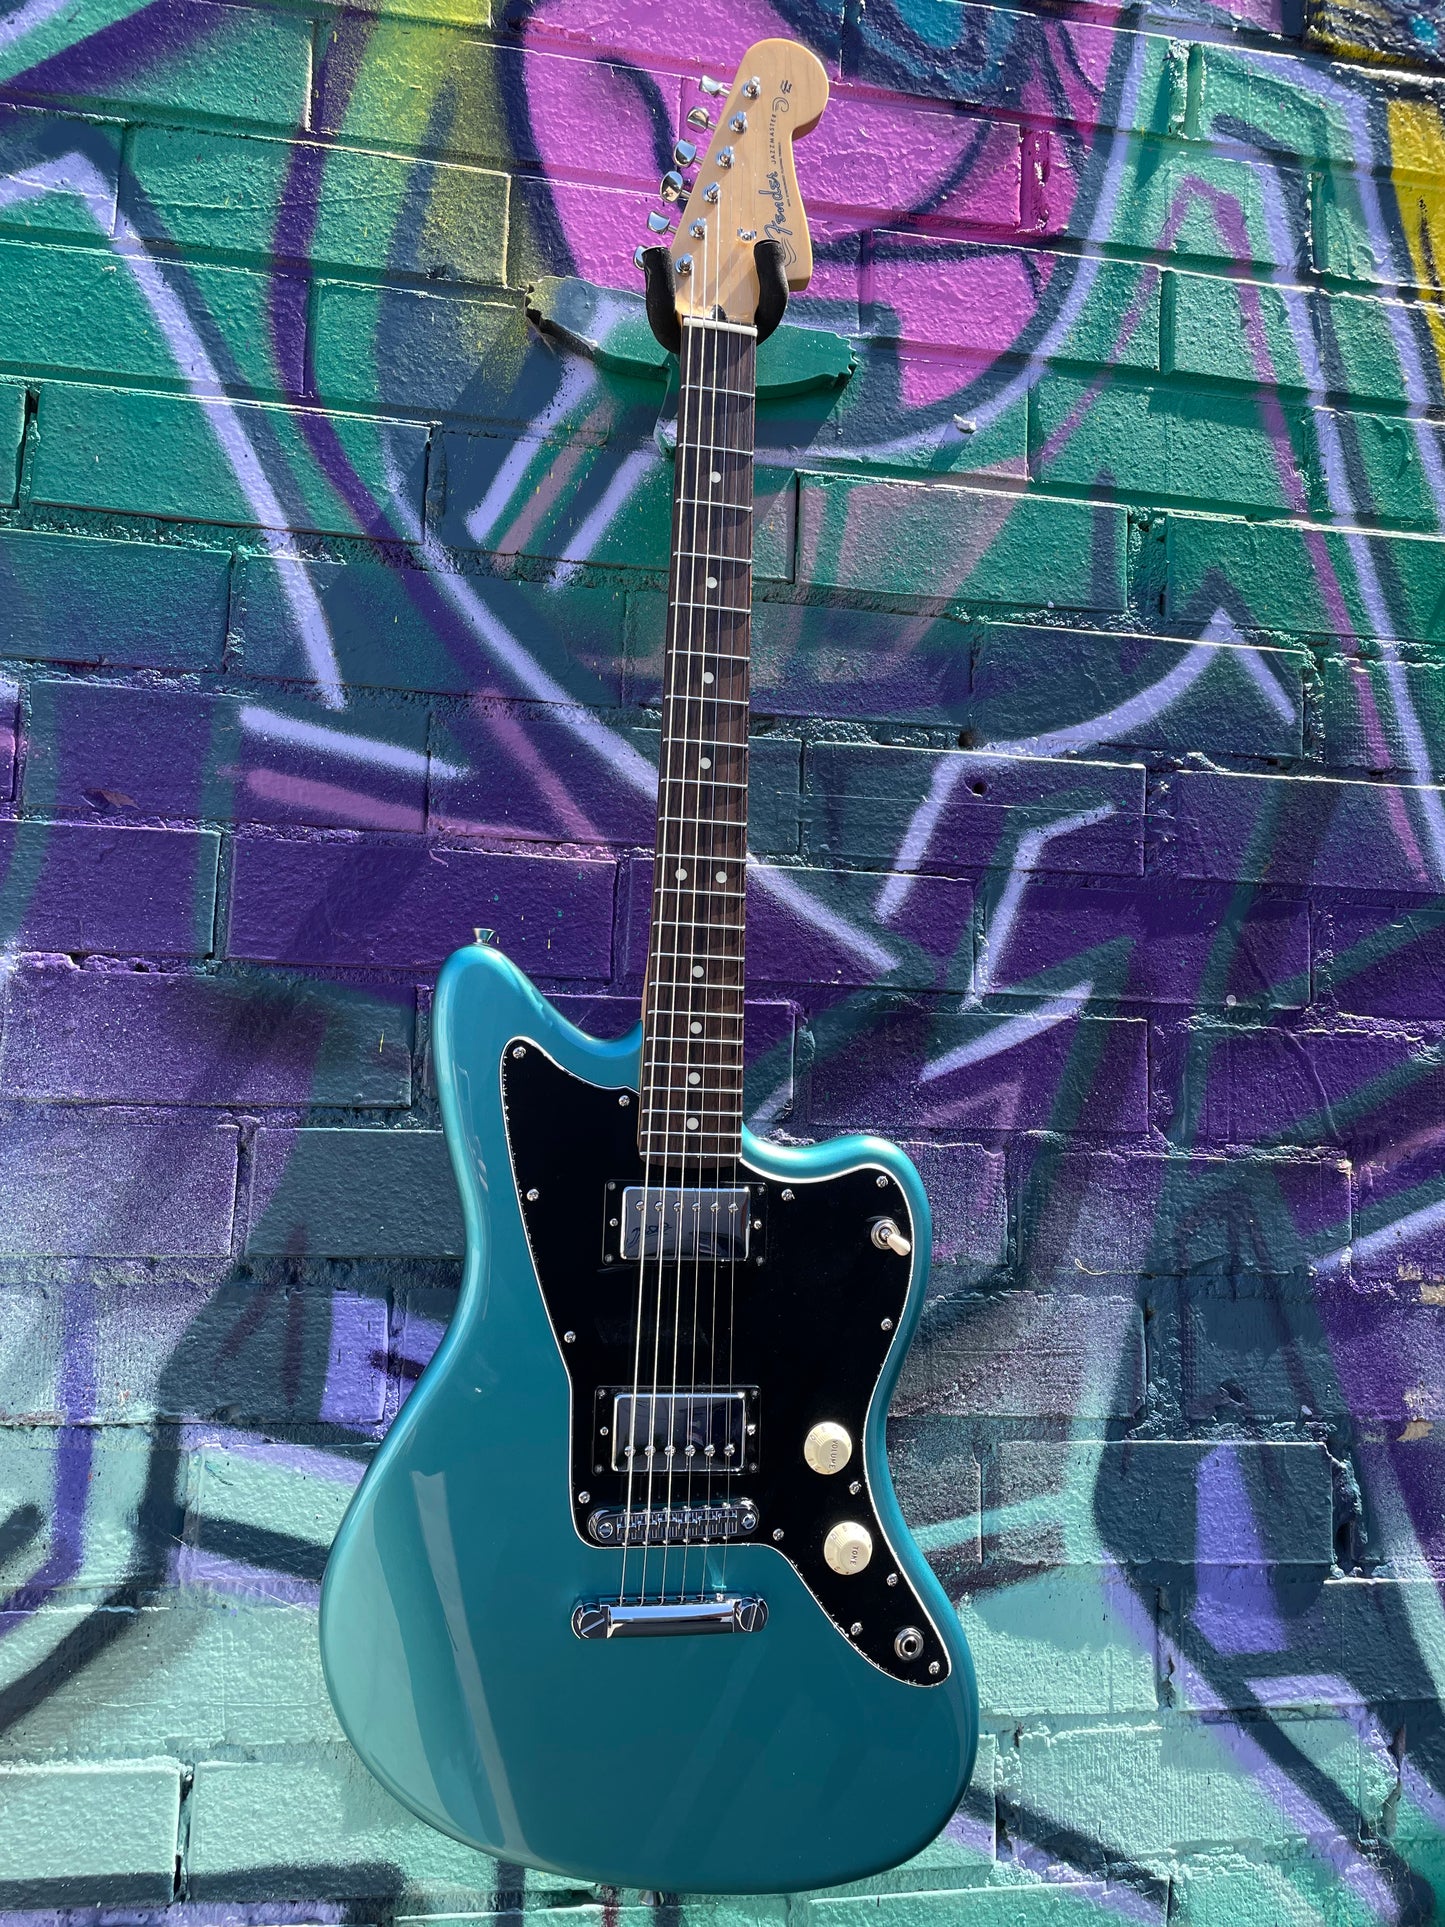 Fender Made in Japan Limited Edition Adjusto-Matic Jazzmaster Electric Guitar - Teal Green Metallic